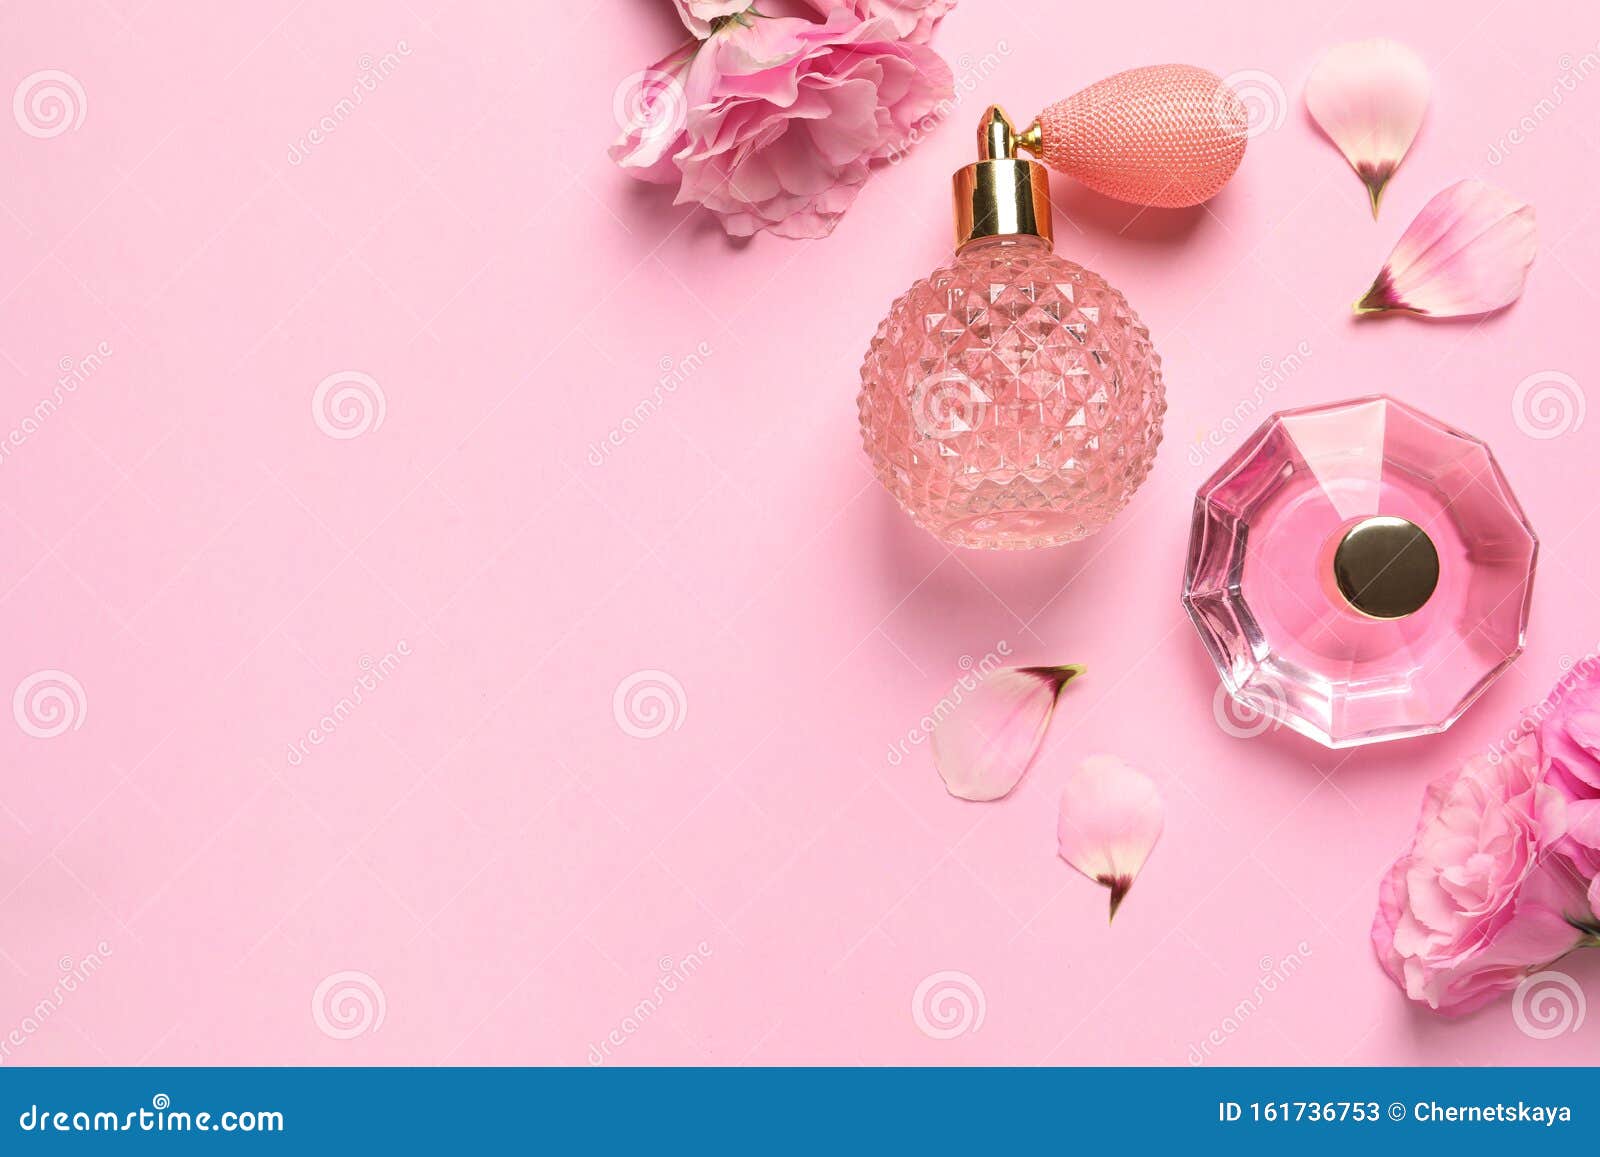 flat lay composition with perfume bottles and flowers on pink background, space for text